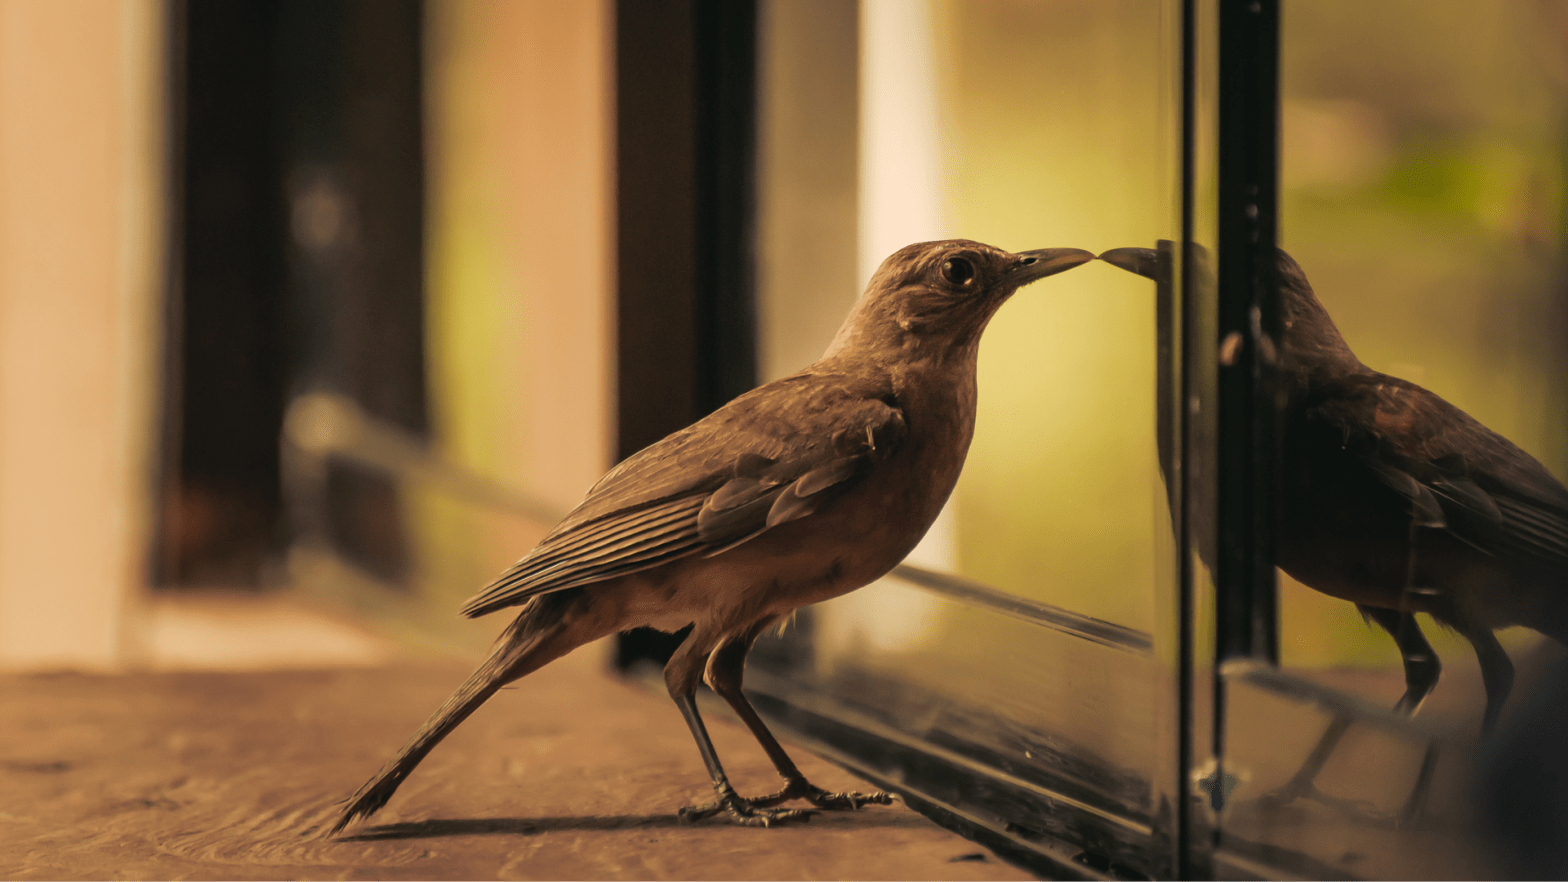 How to Stop Birds From Pecking at Your Window